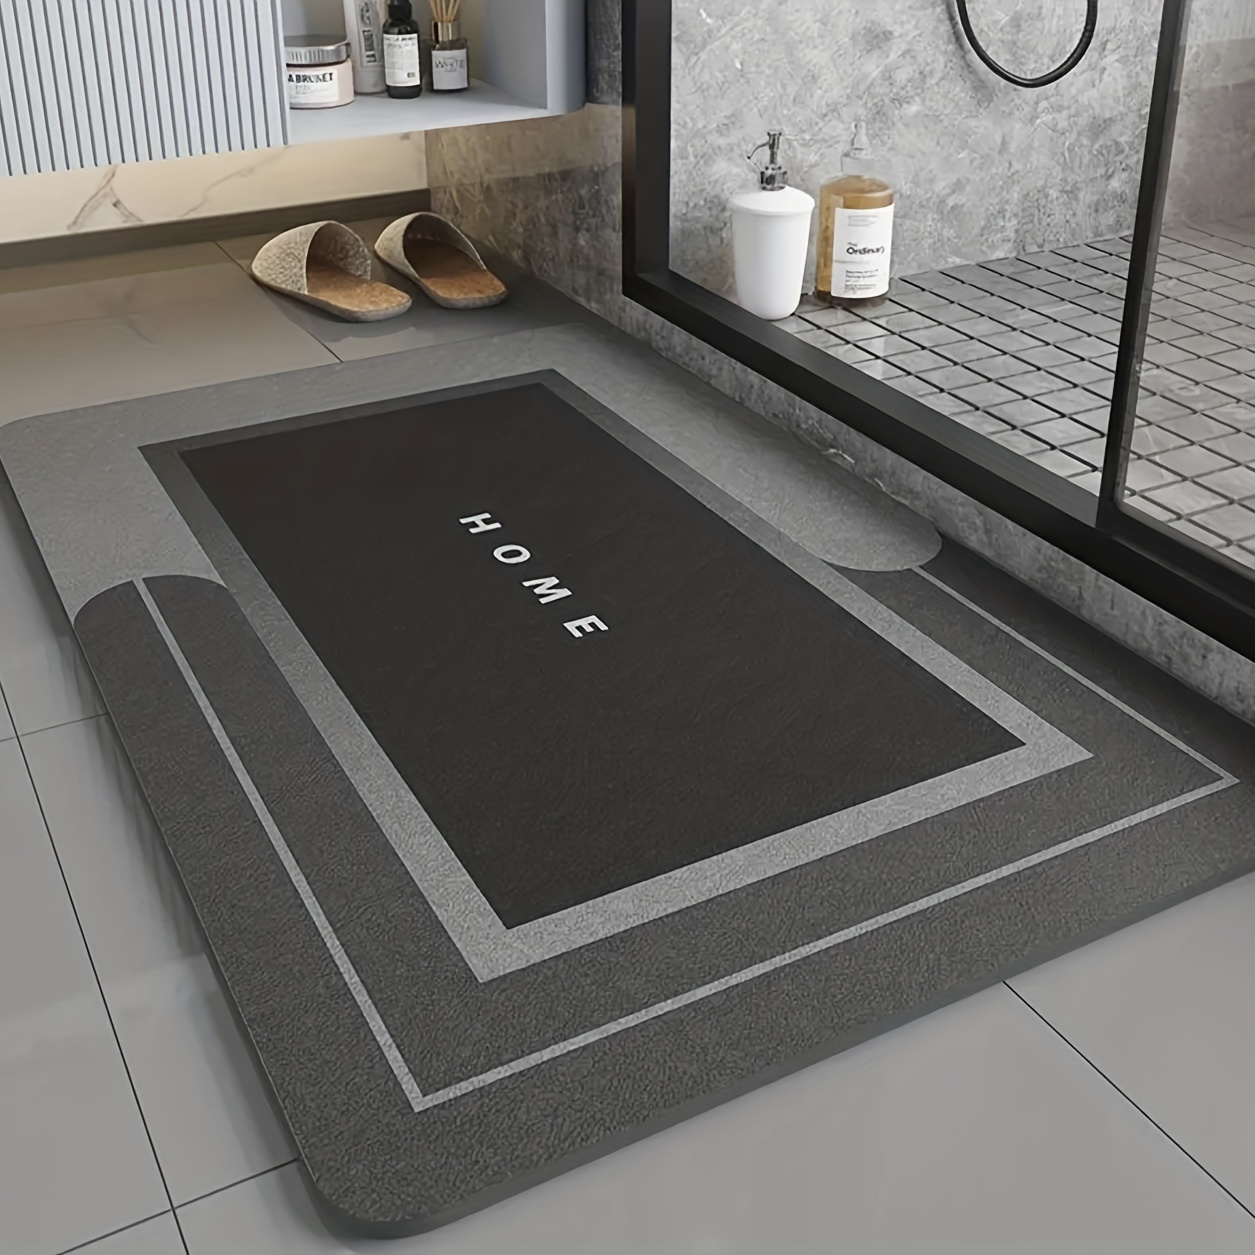 Silica Gel Kitchen Floor Mat, Water & Oil Absorption, Anti-slip, Quick Dry,  Non-washable, Dirt-resistant, Wipeable, High-grade Drainage Mat For Toilet,  Bathroom, Shower Room